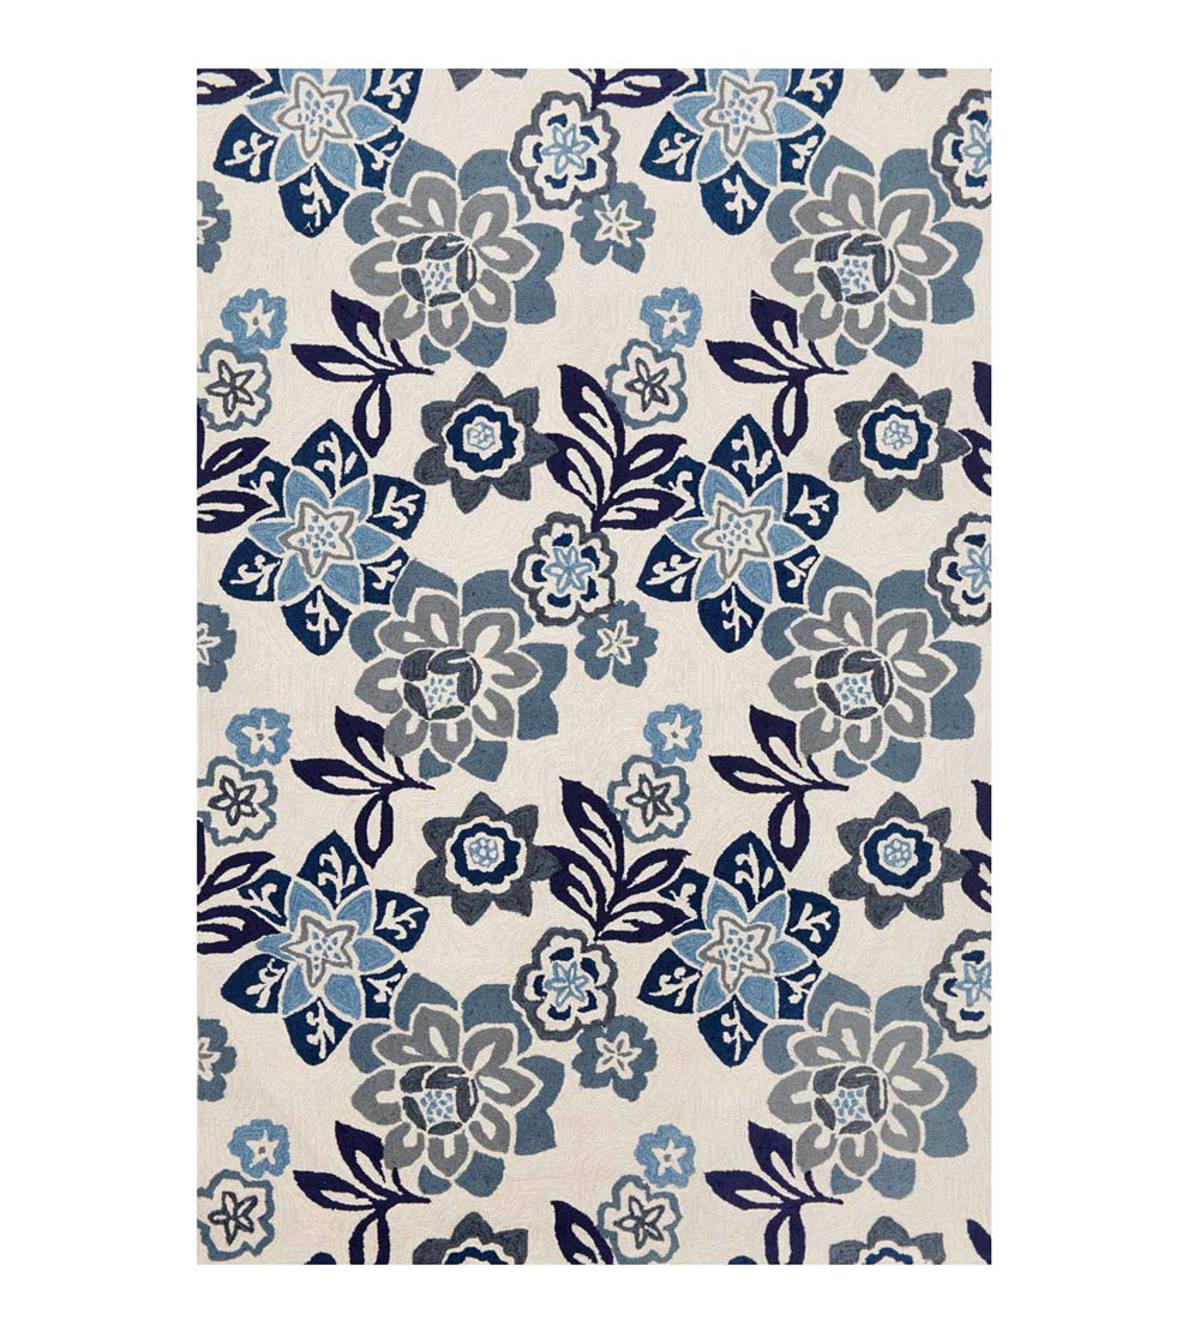 China Blue Floral Accent Rug, 7'6"W x 9'6"L - China Blue